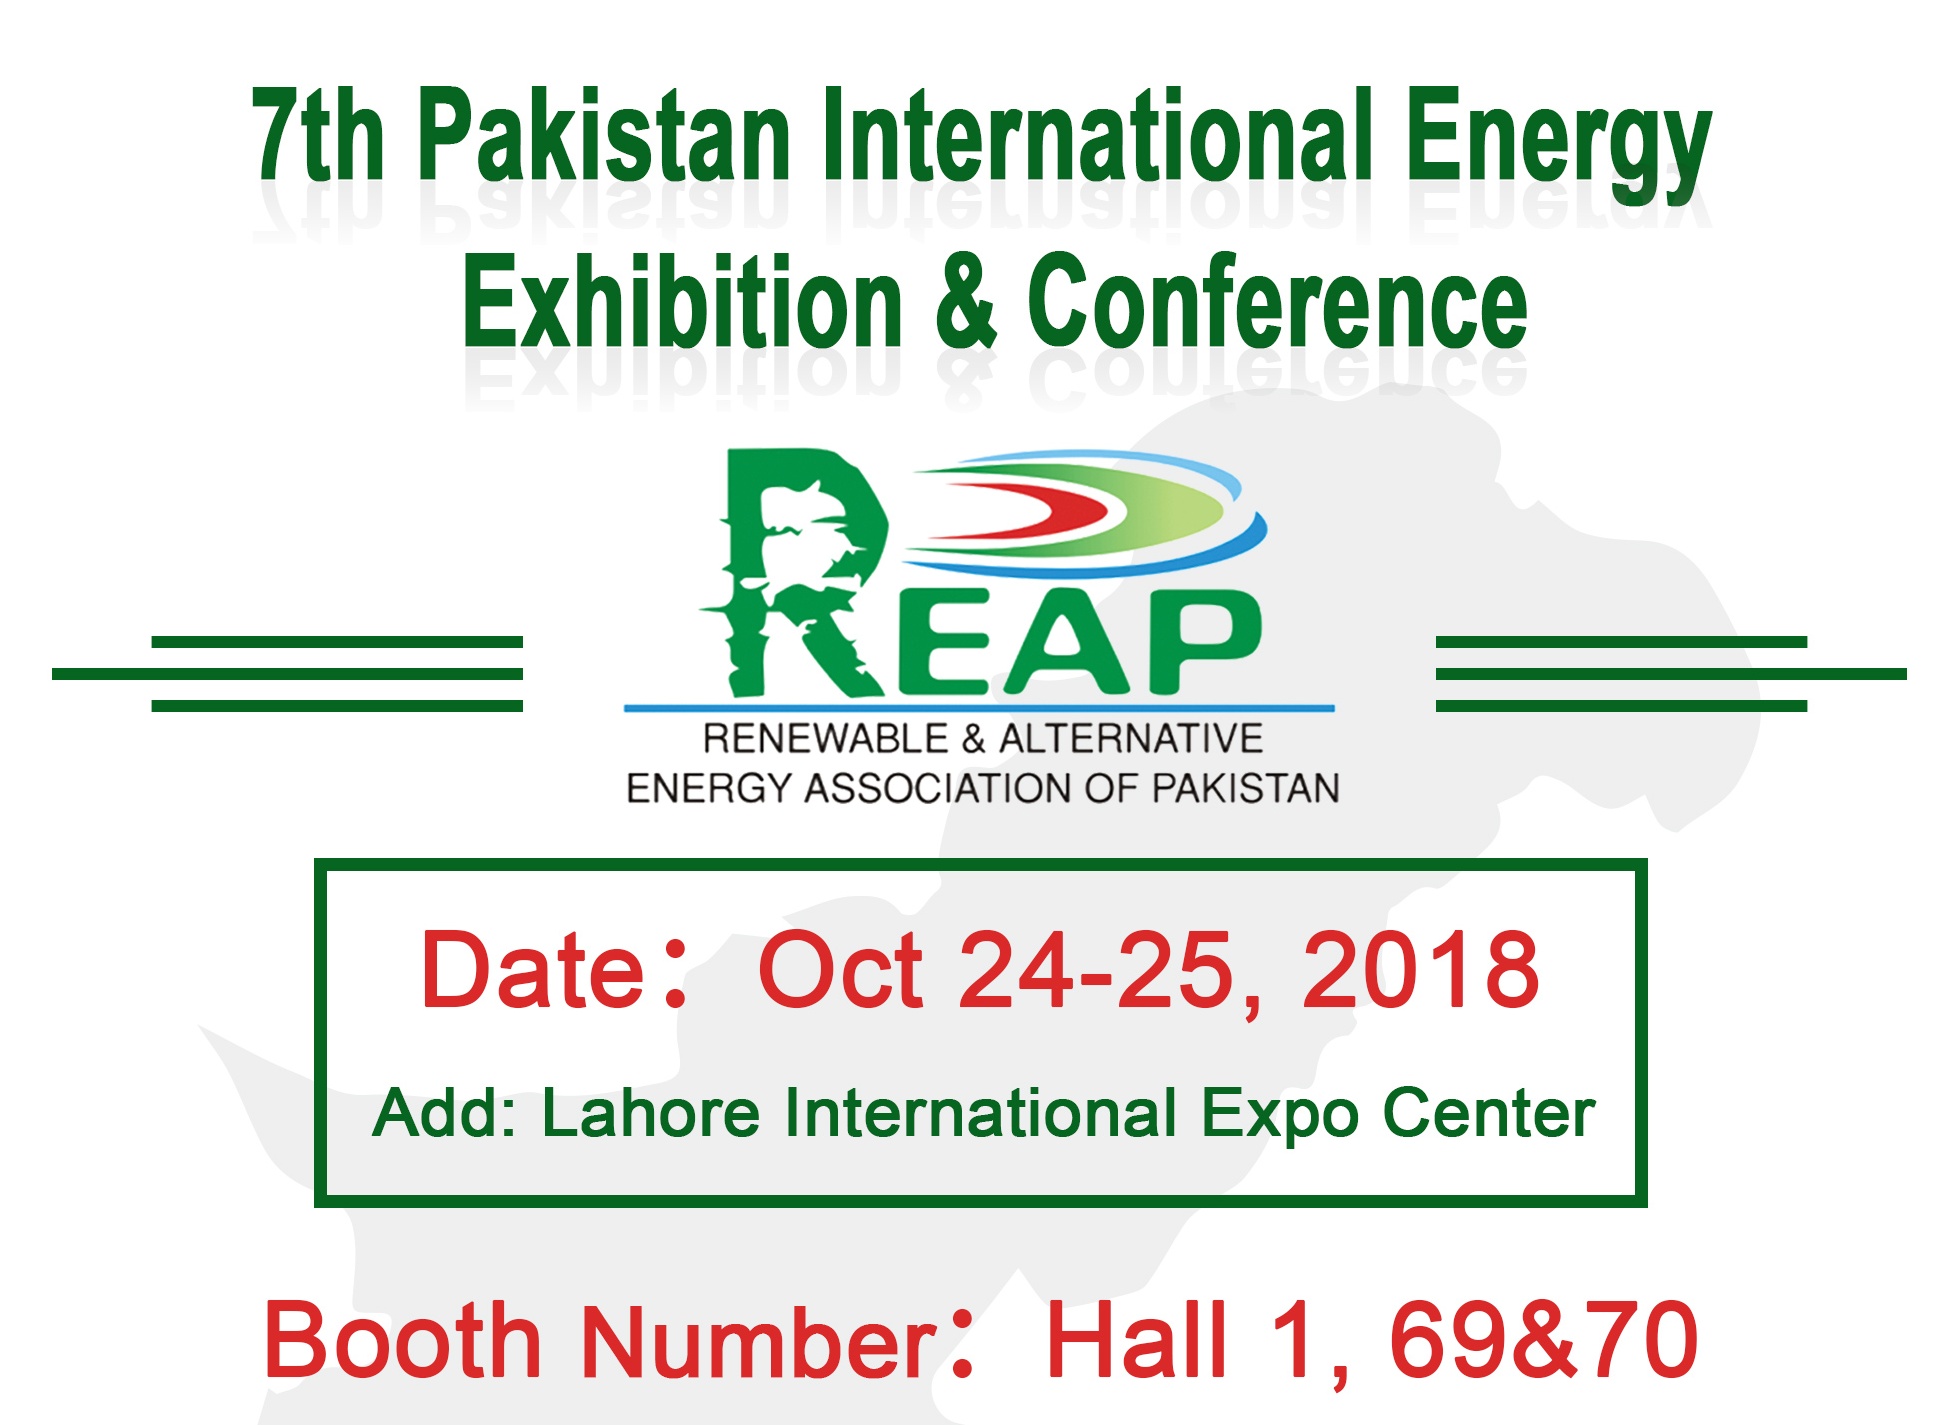 7th Pakistan International Energy Exhibition & Conference 